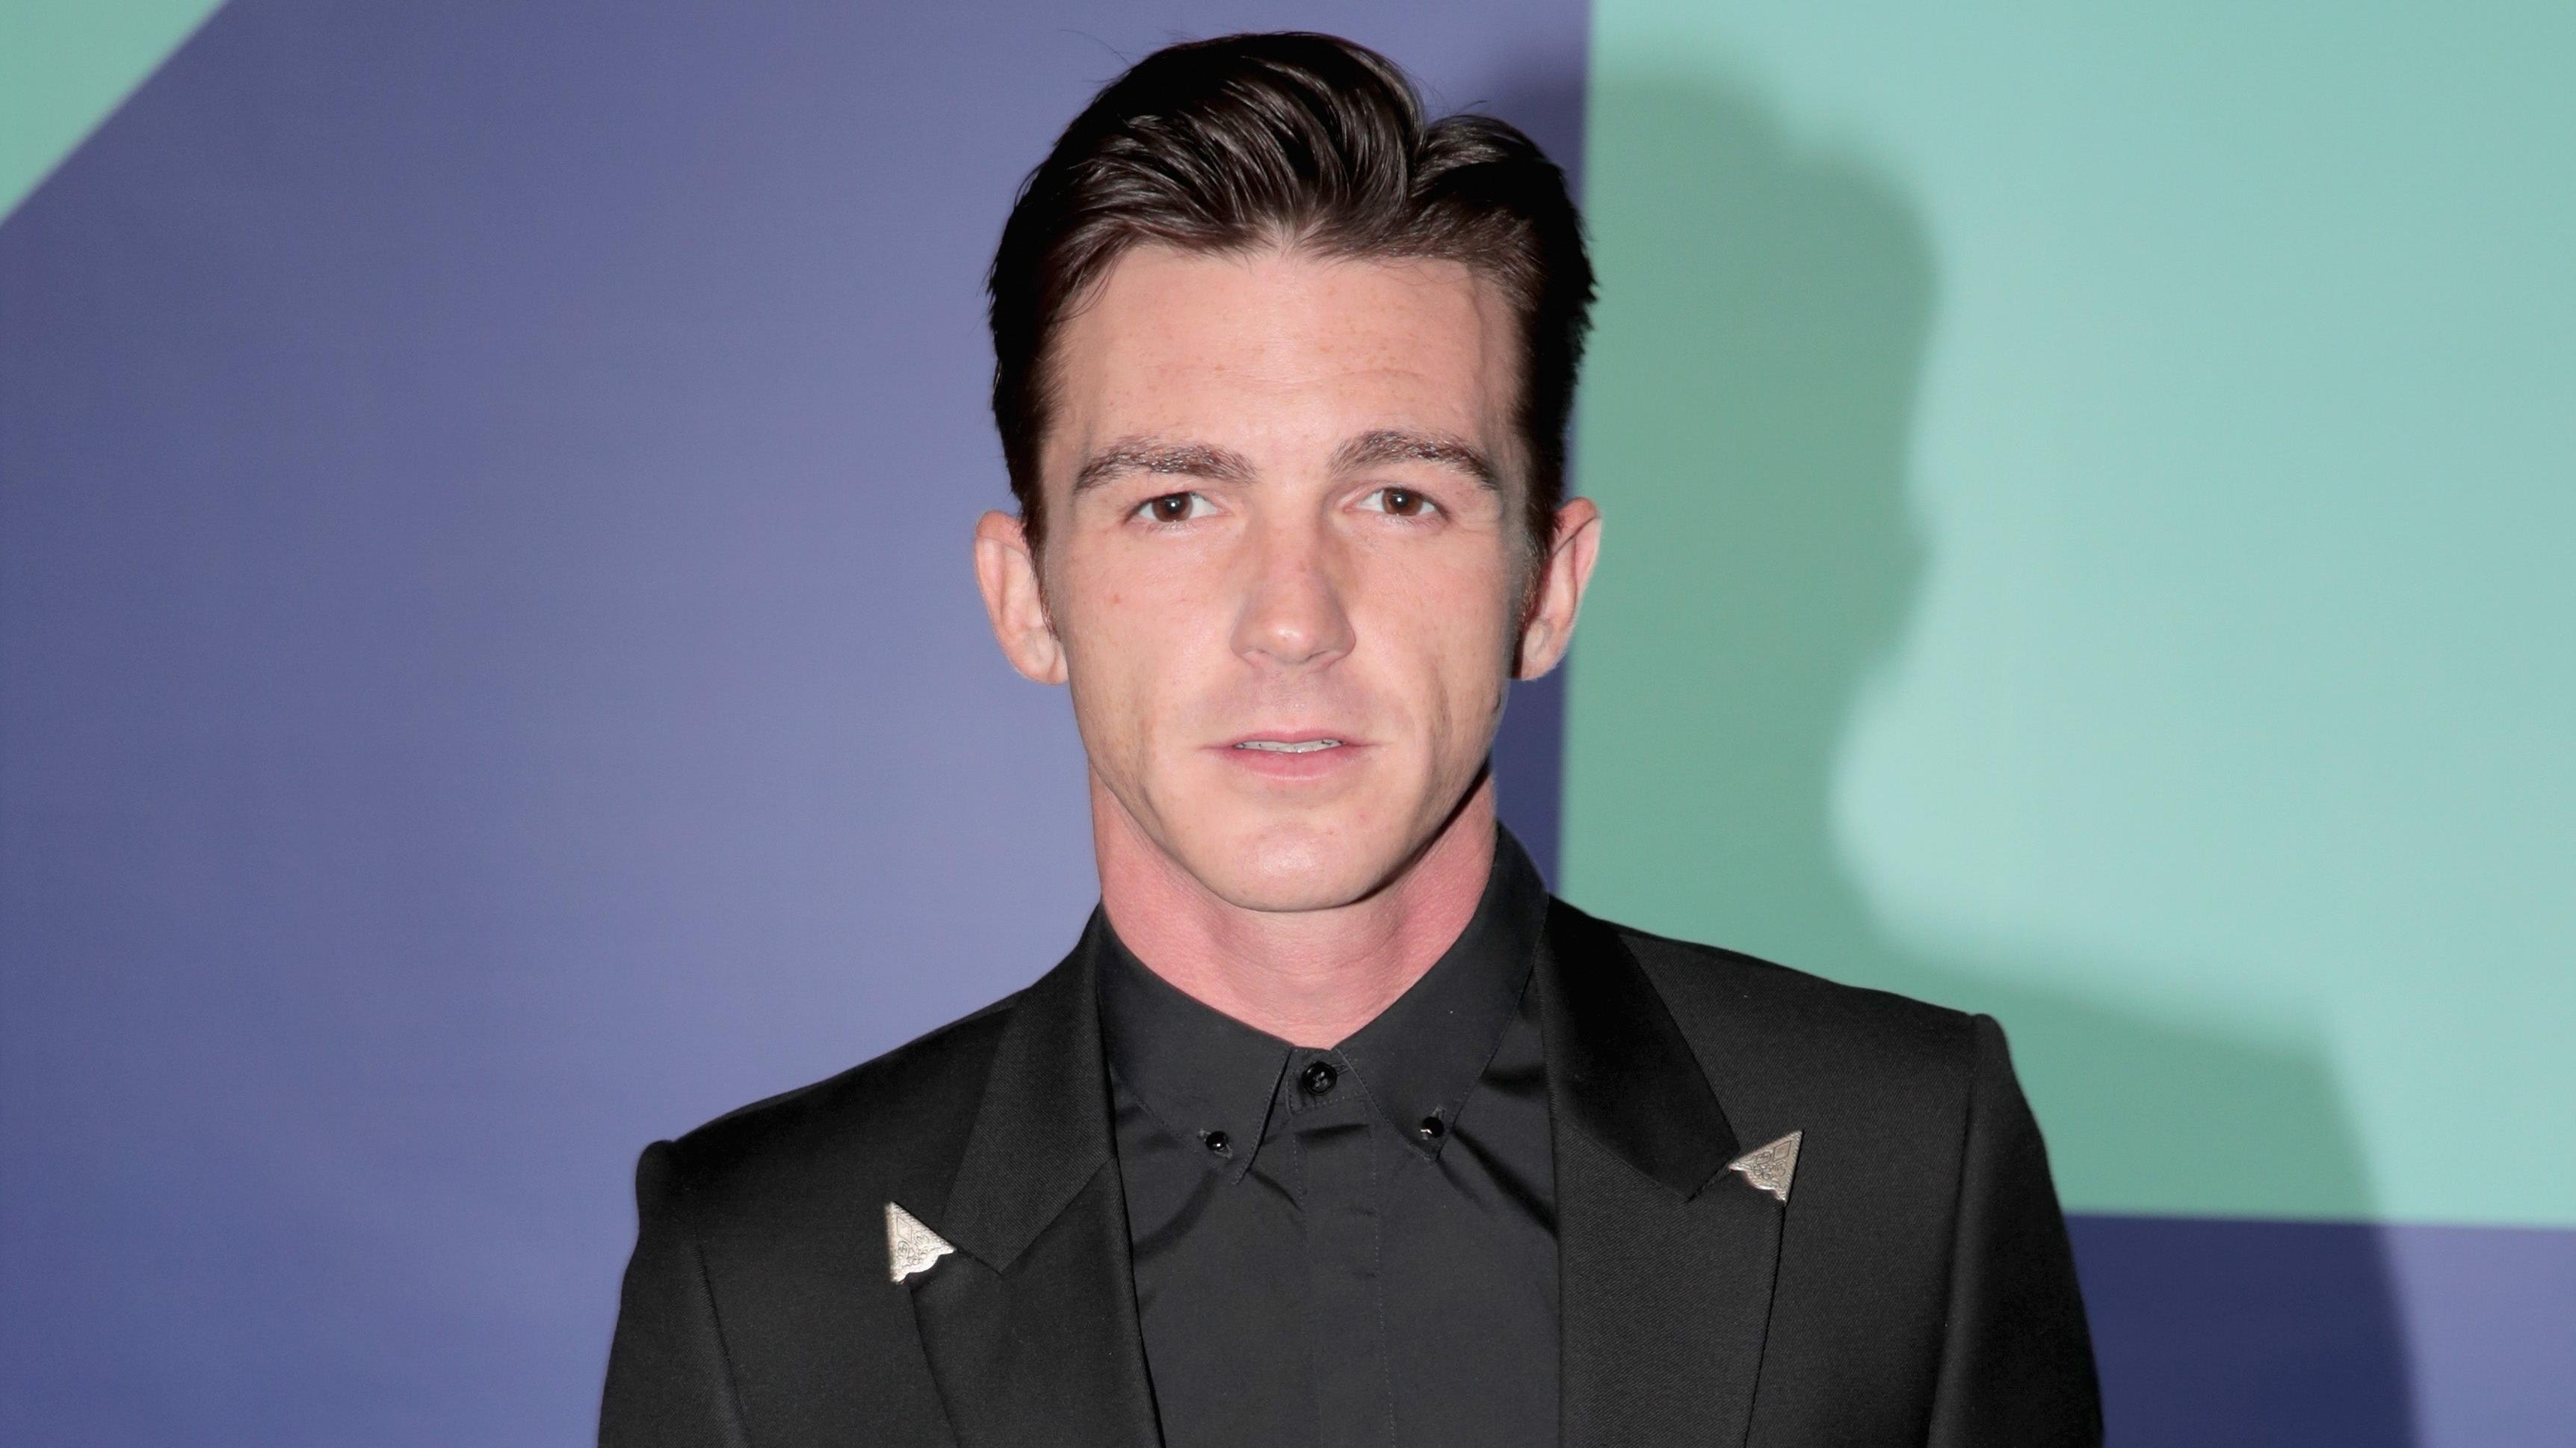 Drake Bell has been charged with child endangerment after alleged inappropriate conduct with a minor